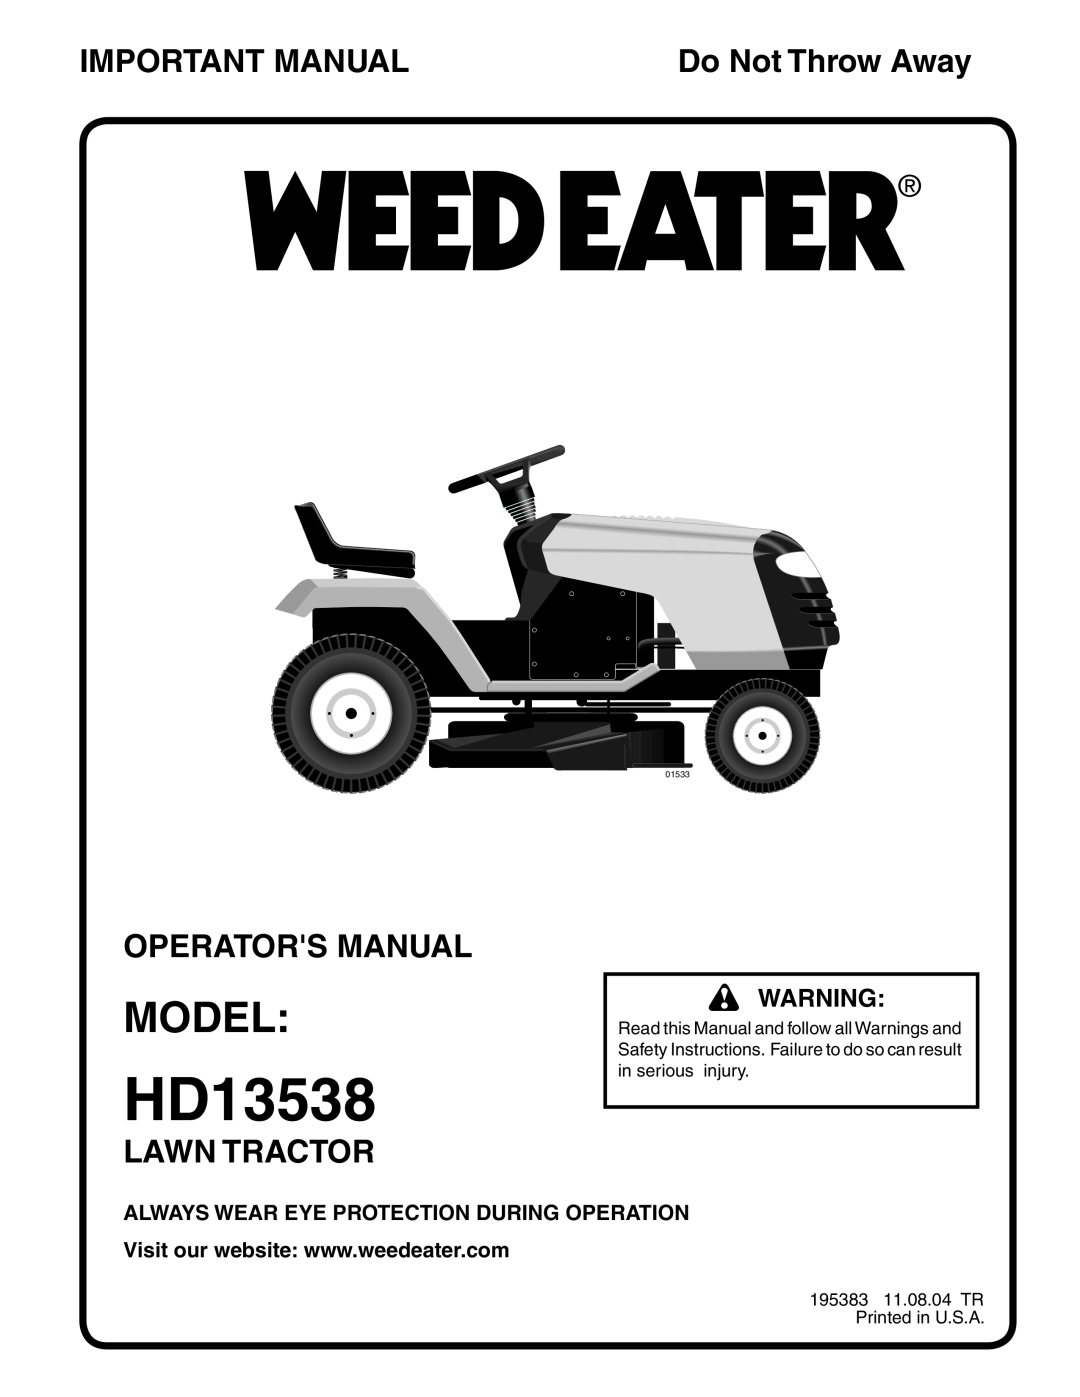 Poulan HD13538 manual Model, Important Manual, Operators Manual, Lawn Tractor, Always Wear Eye Protection During Operation 